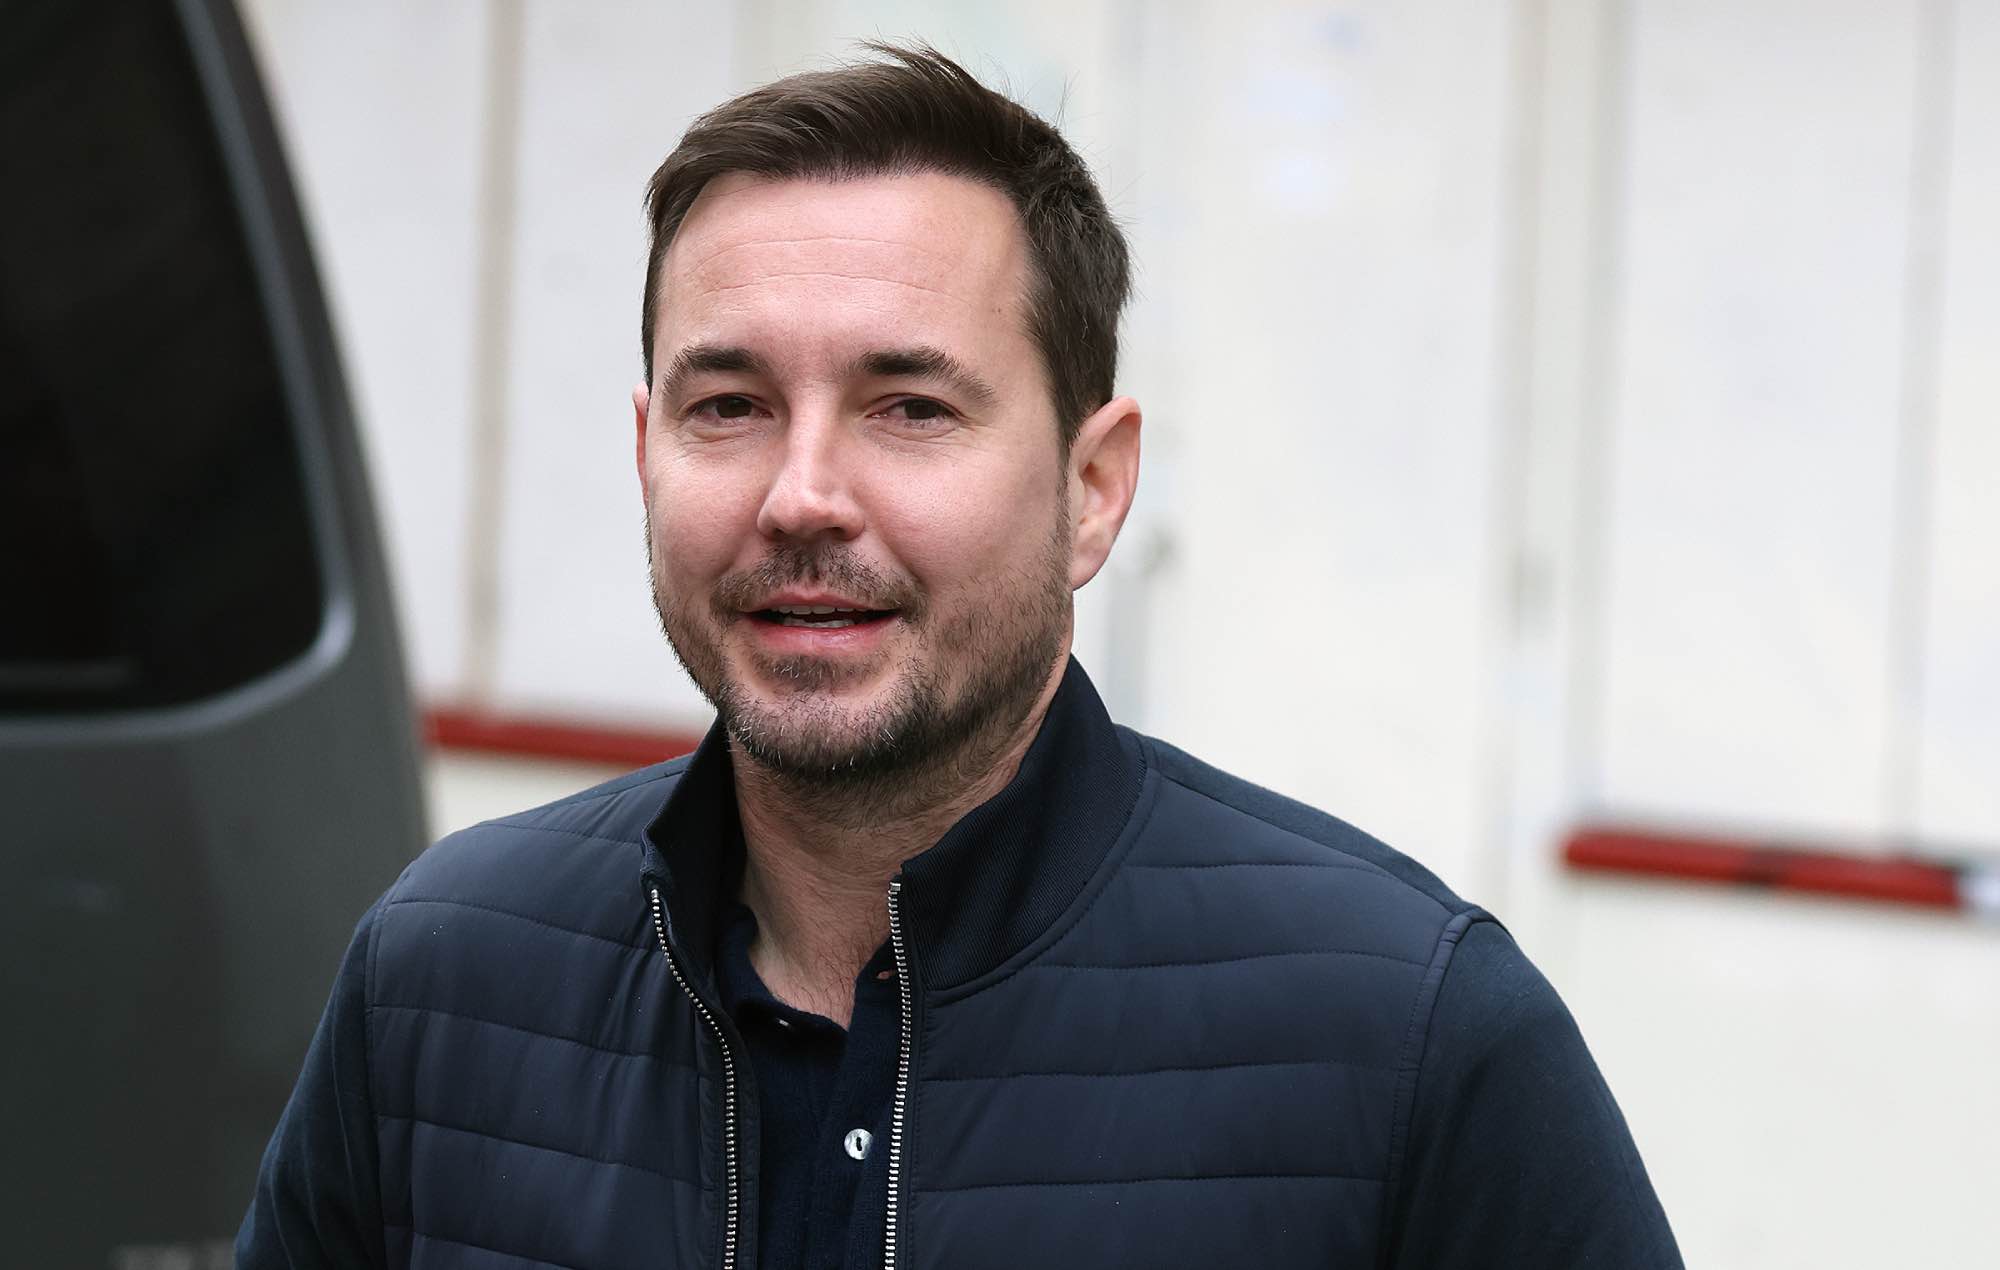 ‘Line Of Duty’ star Martin Compston says ‘Game Of Thrones’ turned him down